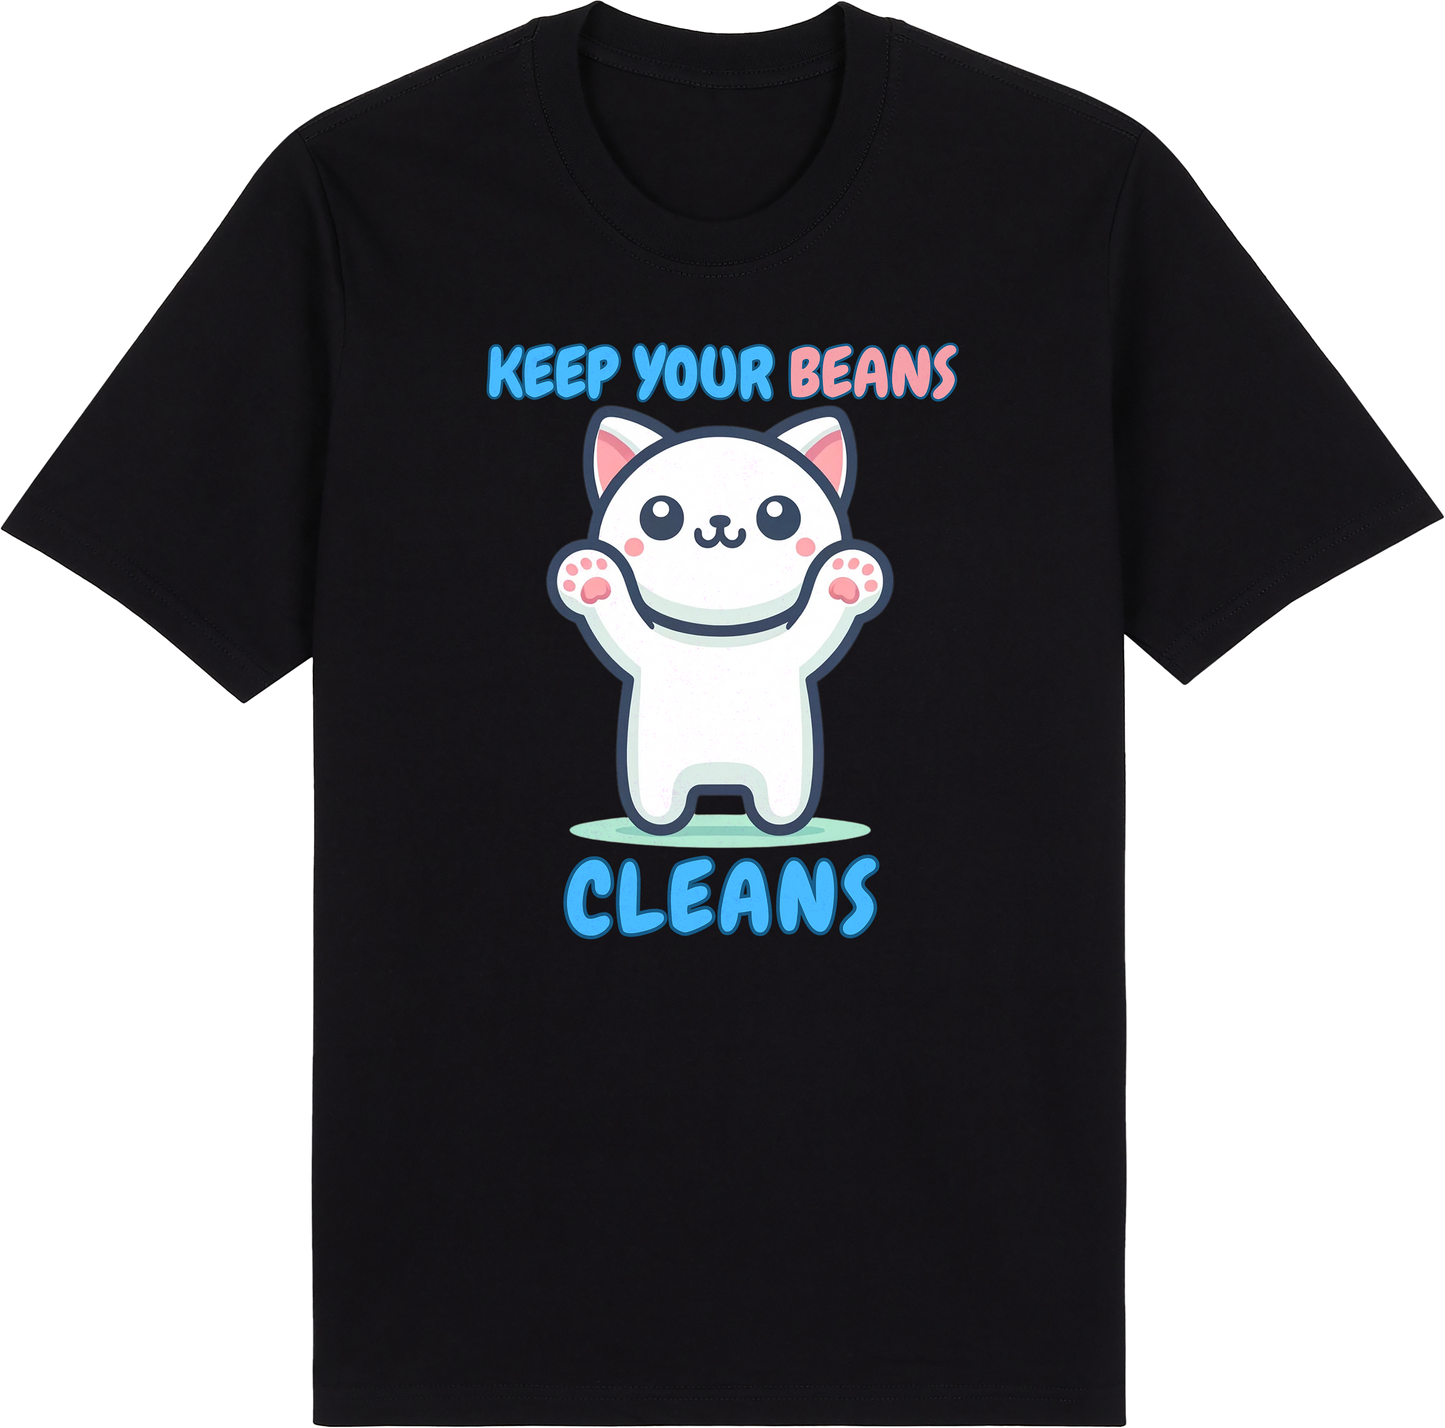 Keep Your Beans Cleans